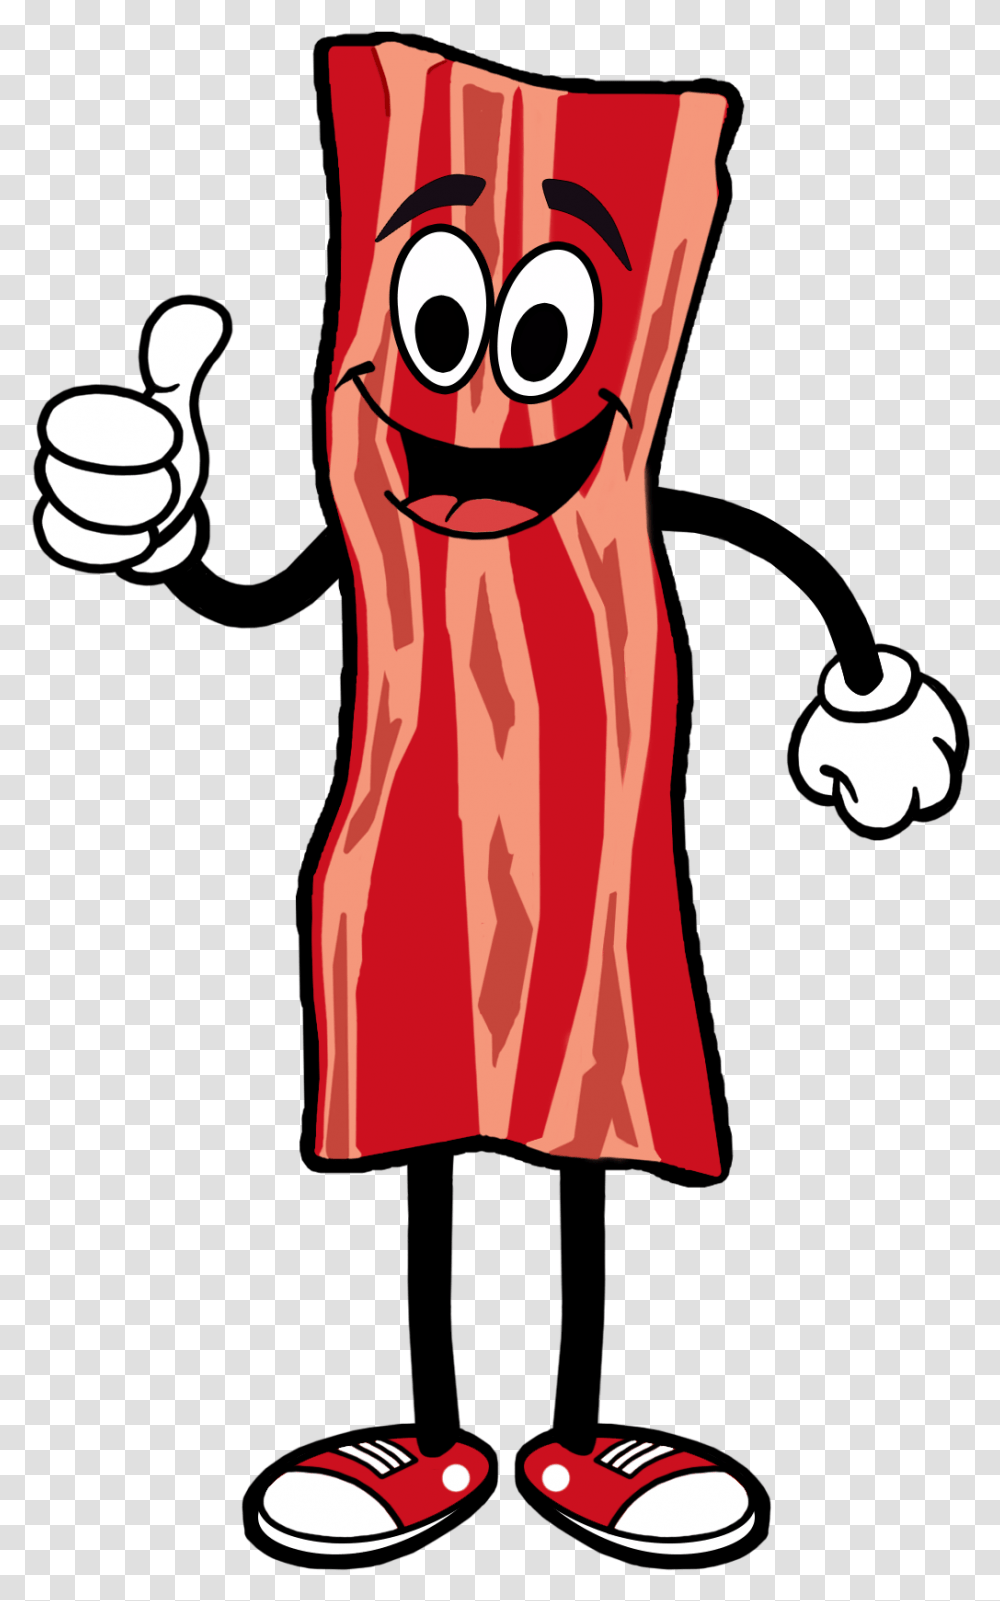 Bacon Cartoon Background Cartoon Bacon, Hand, Fist, Weapon, Weaponry Transparent Png